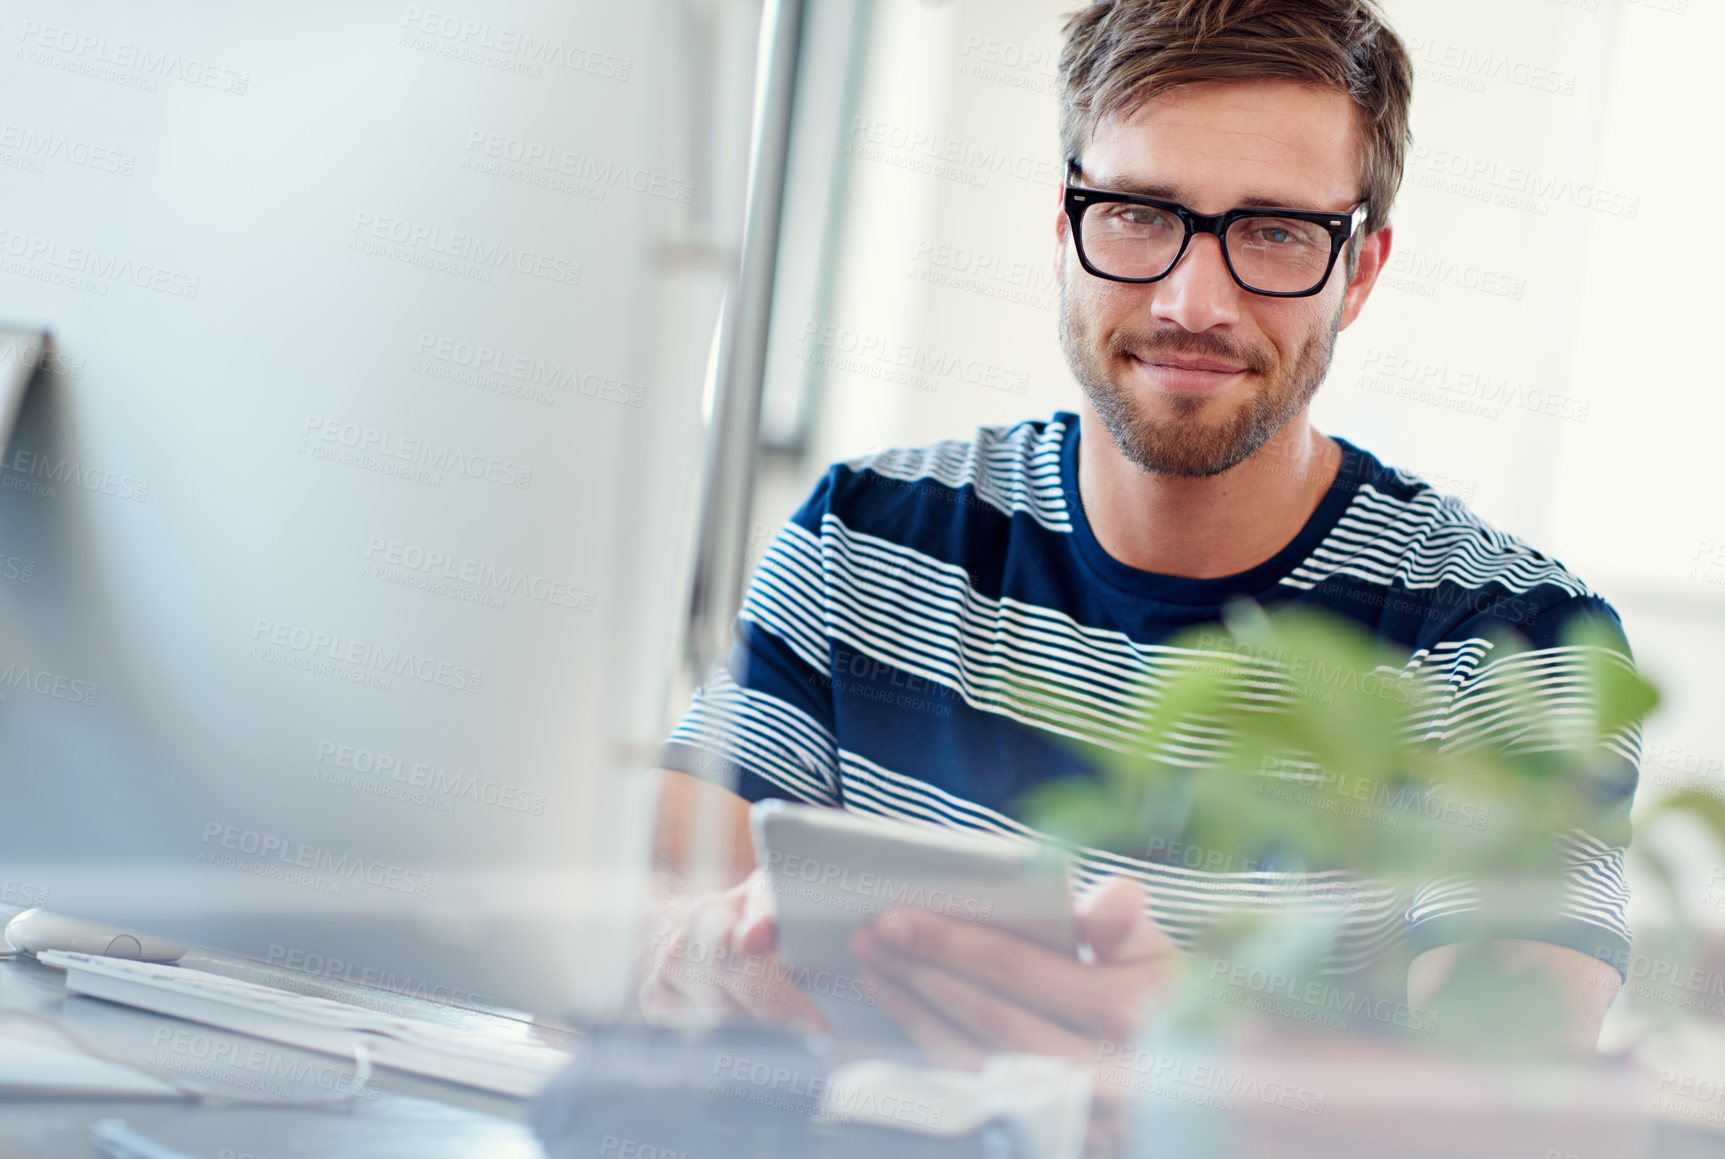 Buy stock photo Portrait of a casually-dressed young man using a digital tablet at his desk